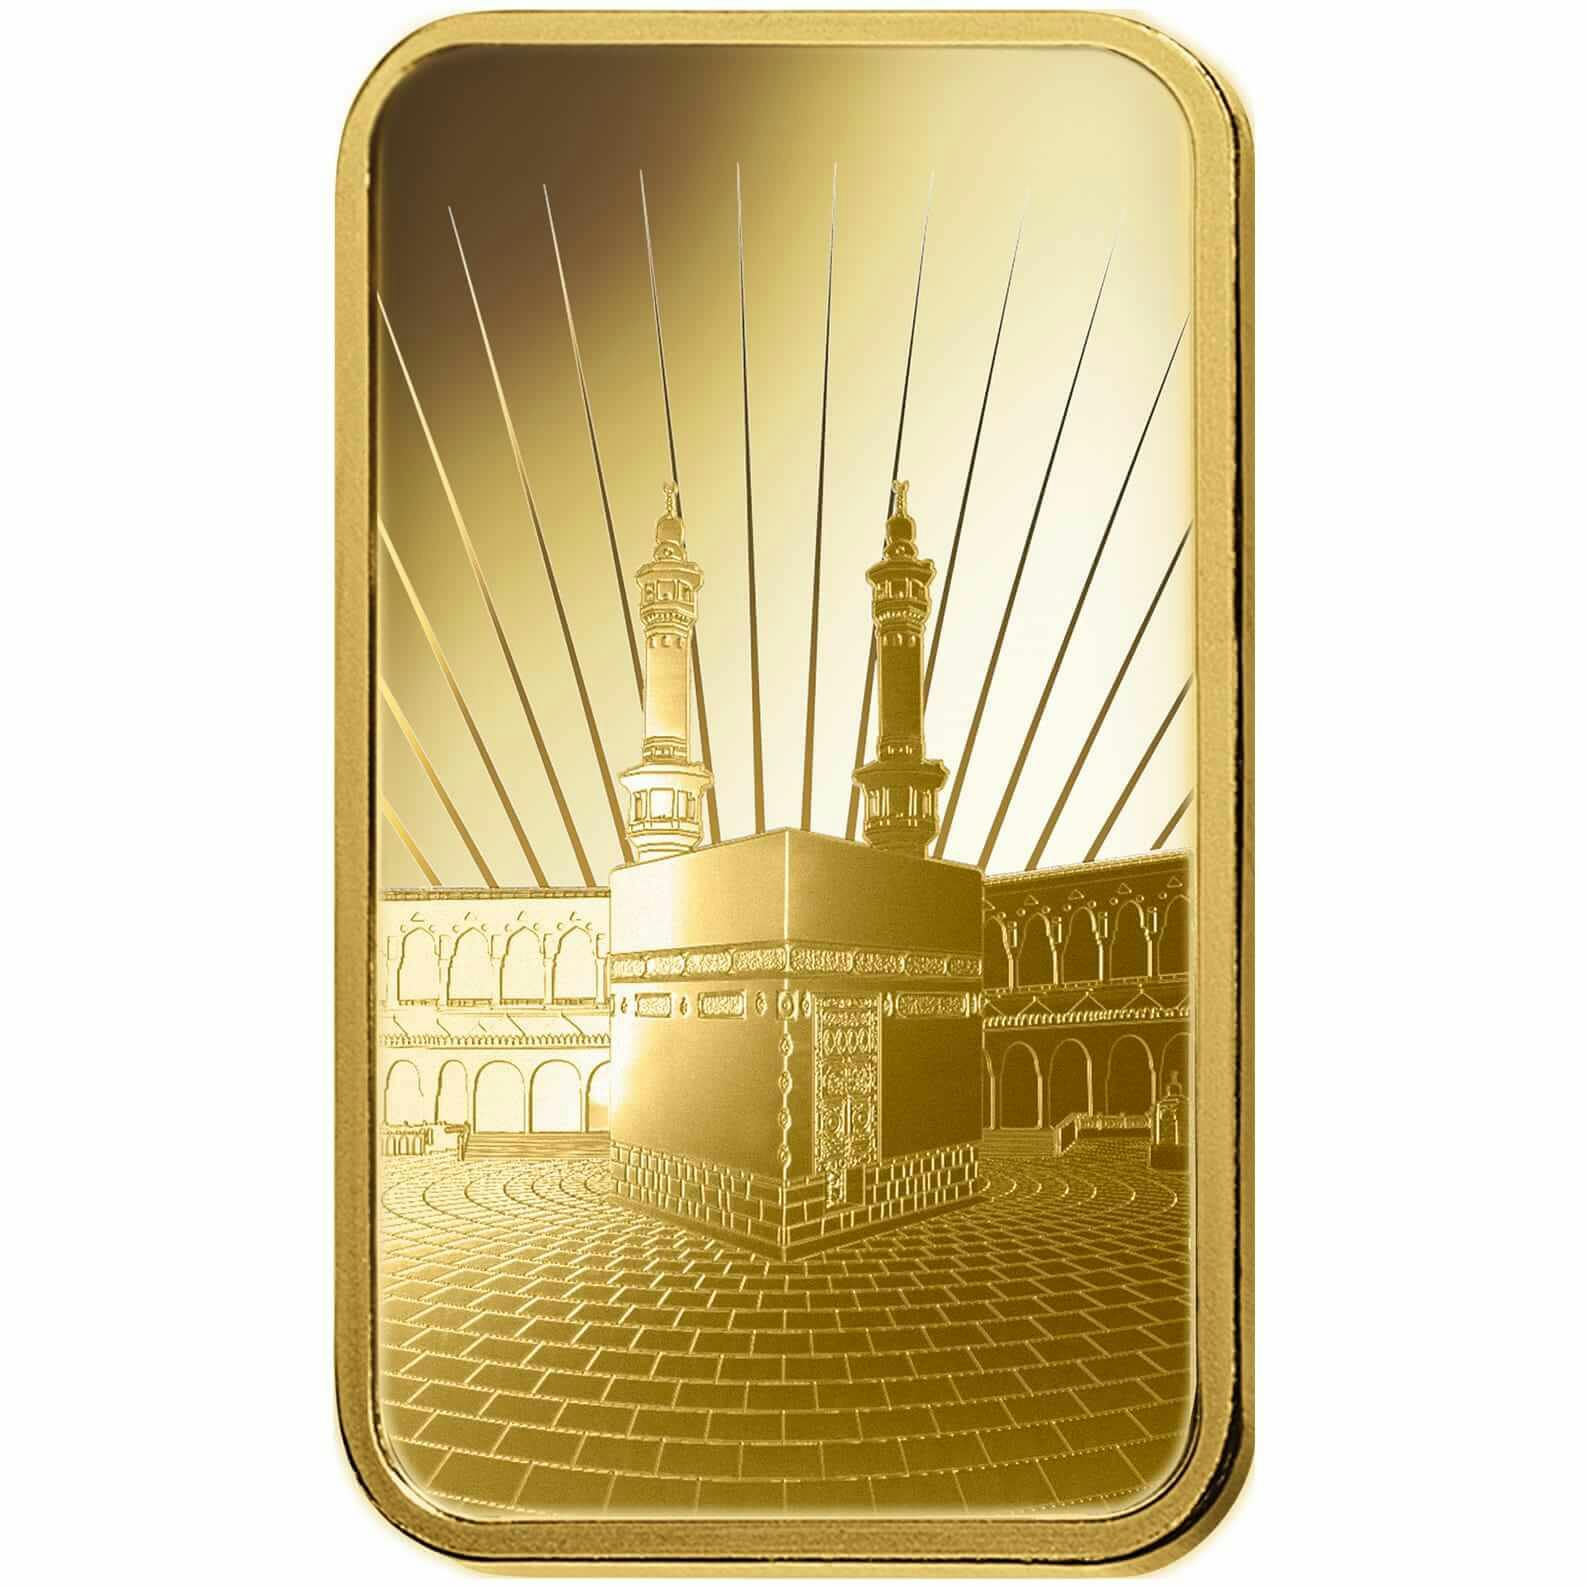 Achat d'or, 10 gram d'or pur Ka'Bah Mecca - PAMP Suisse - Front 